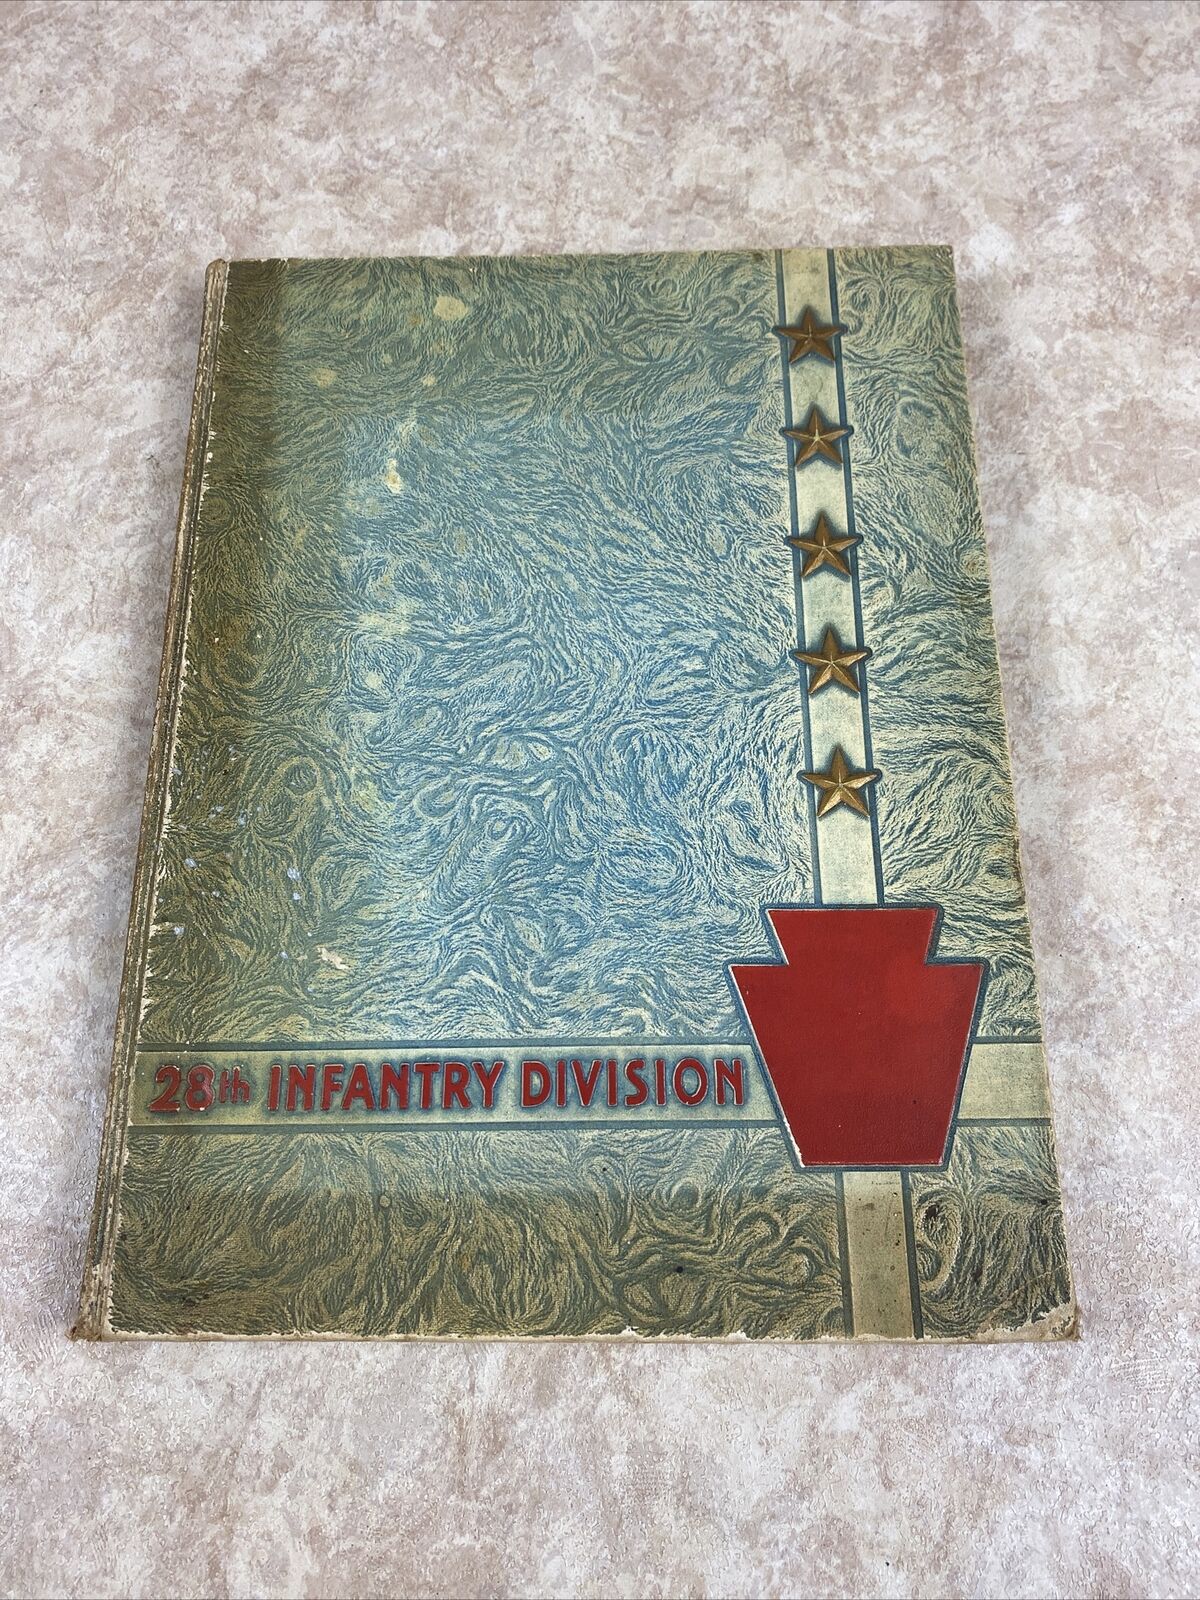 Rare WWII Book - 28th Infantry Division - Historical & Pictorial Review